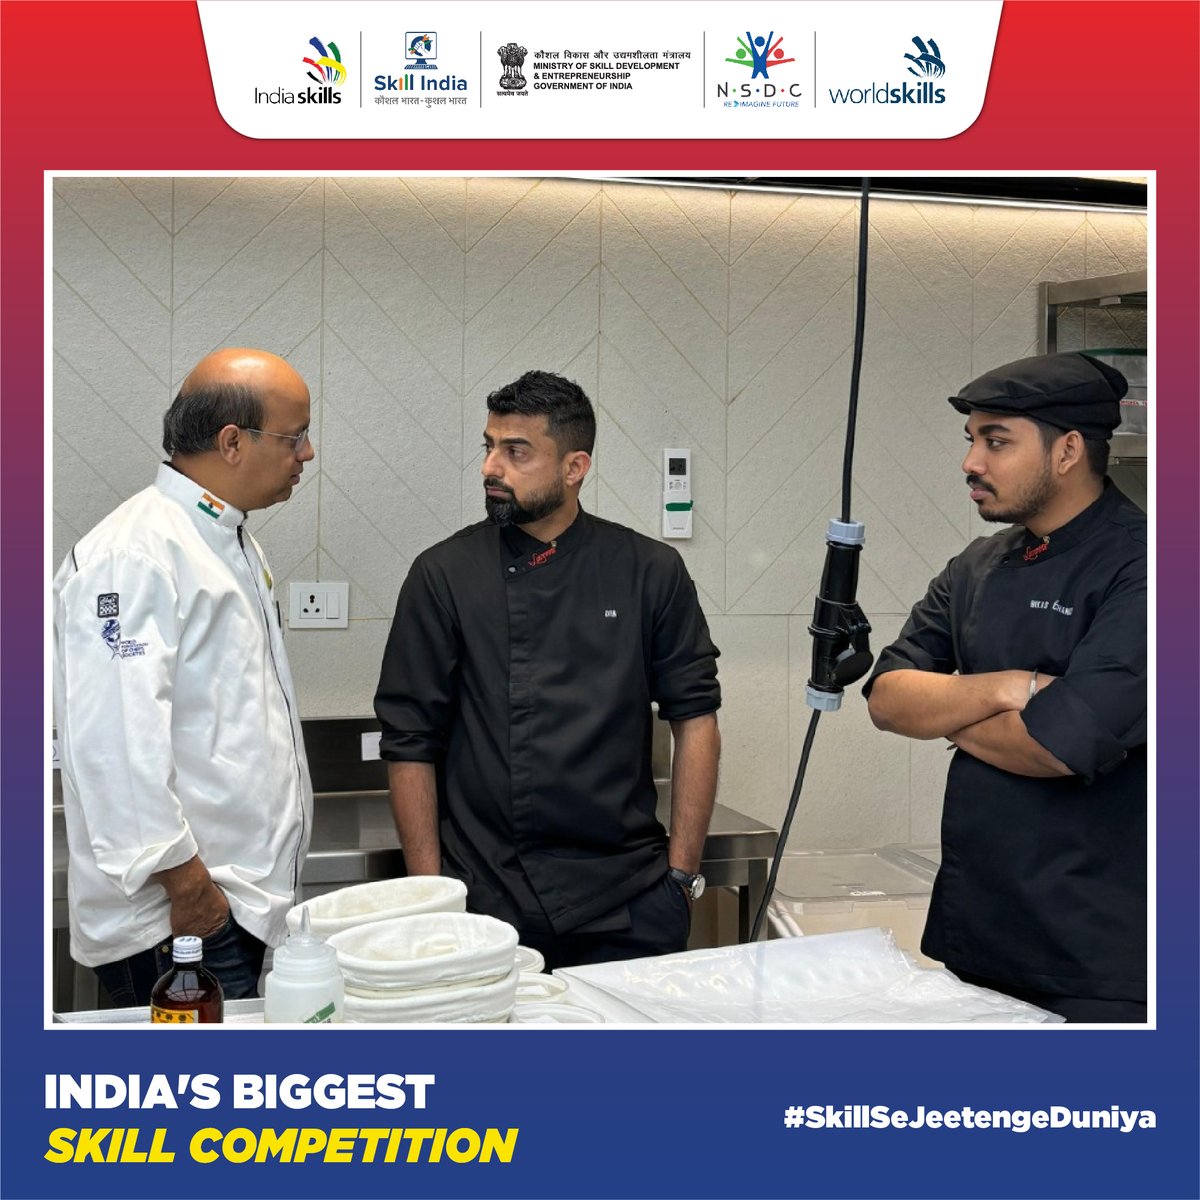 Witness greatness! IndiaSkills 2024 candidates dazzled, securing 3 golds in Bakery! Now, they aim to represent India at WorldSkills Lyon! #Talent #Determination

#IndiaSkills24 #WorldSkillsLyon #BakeryChampions